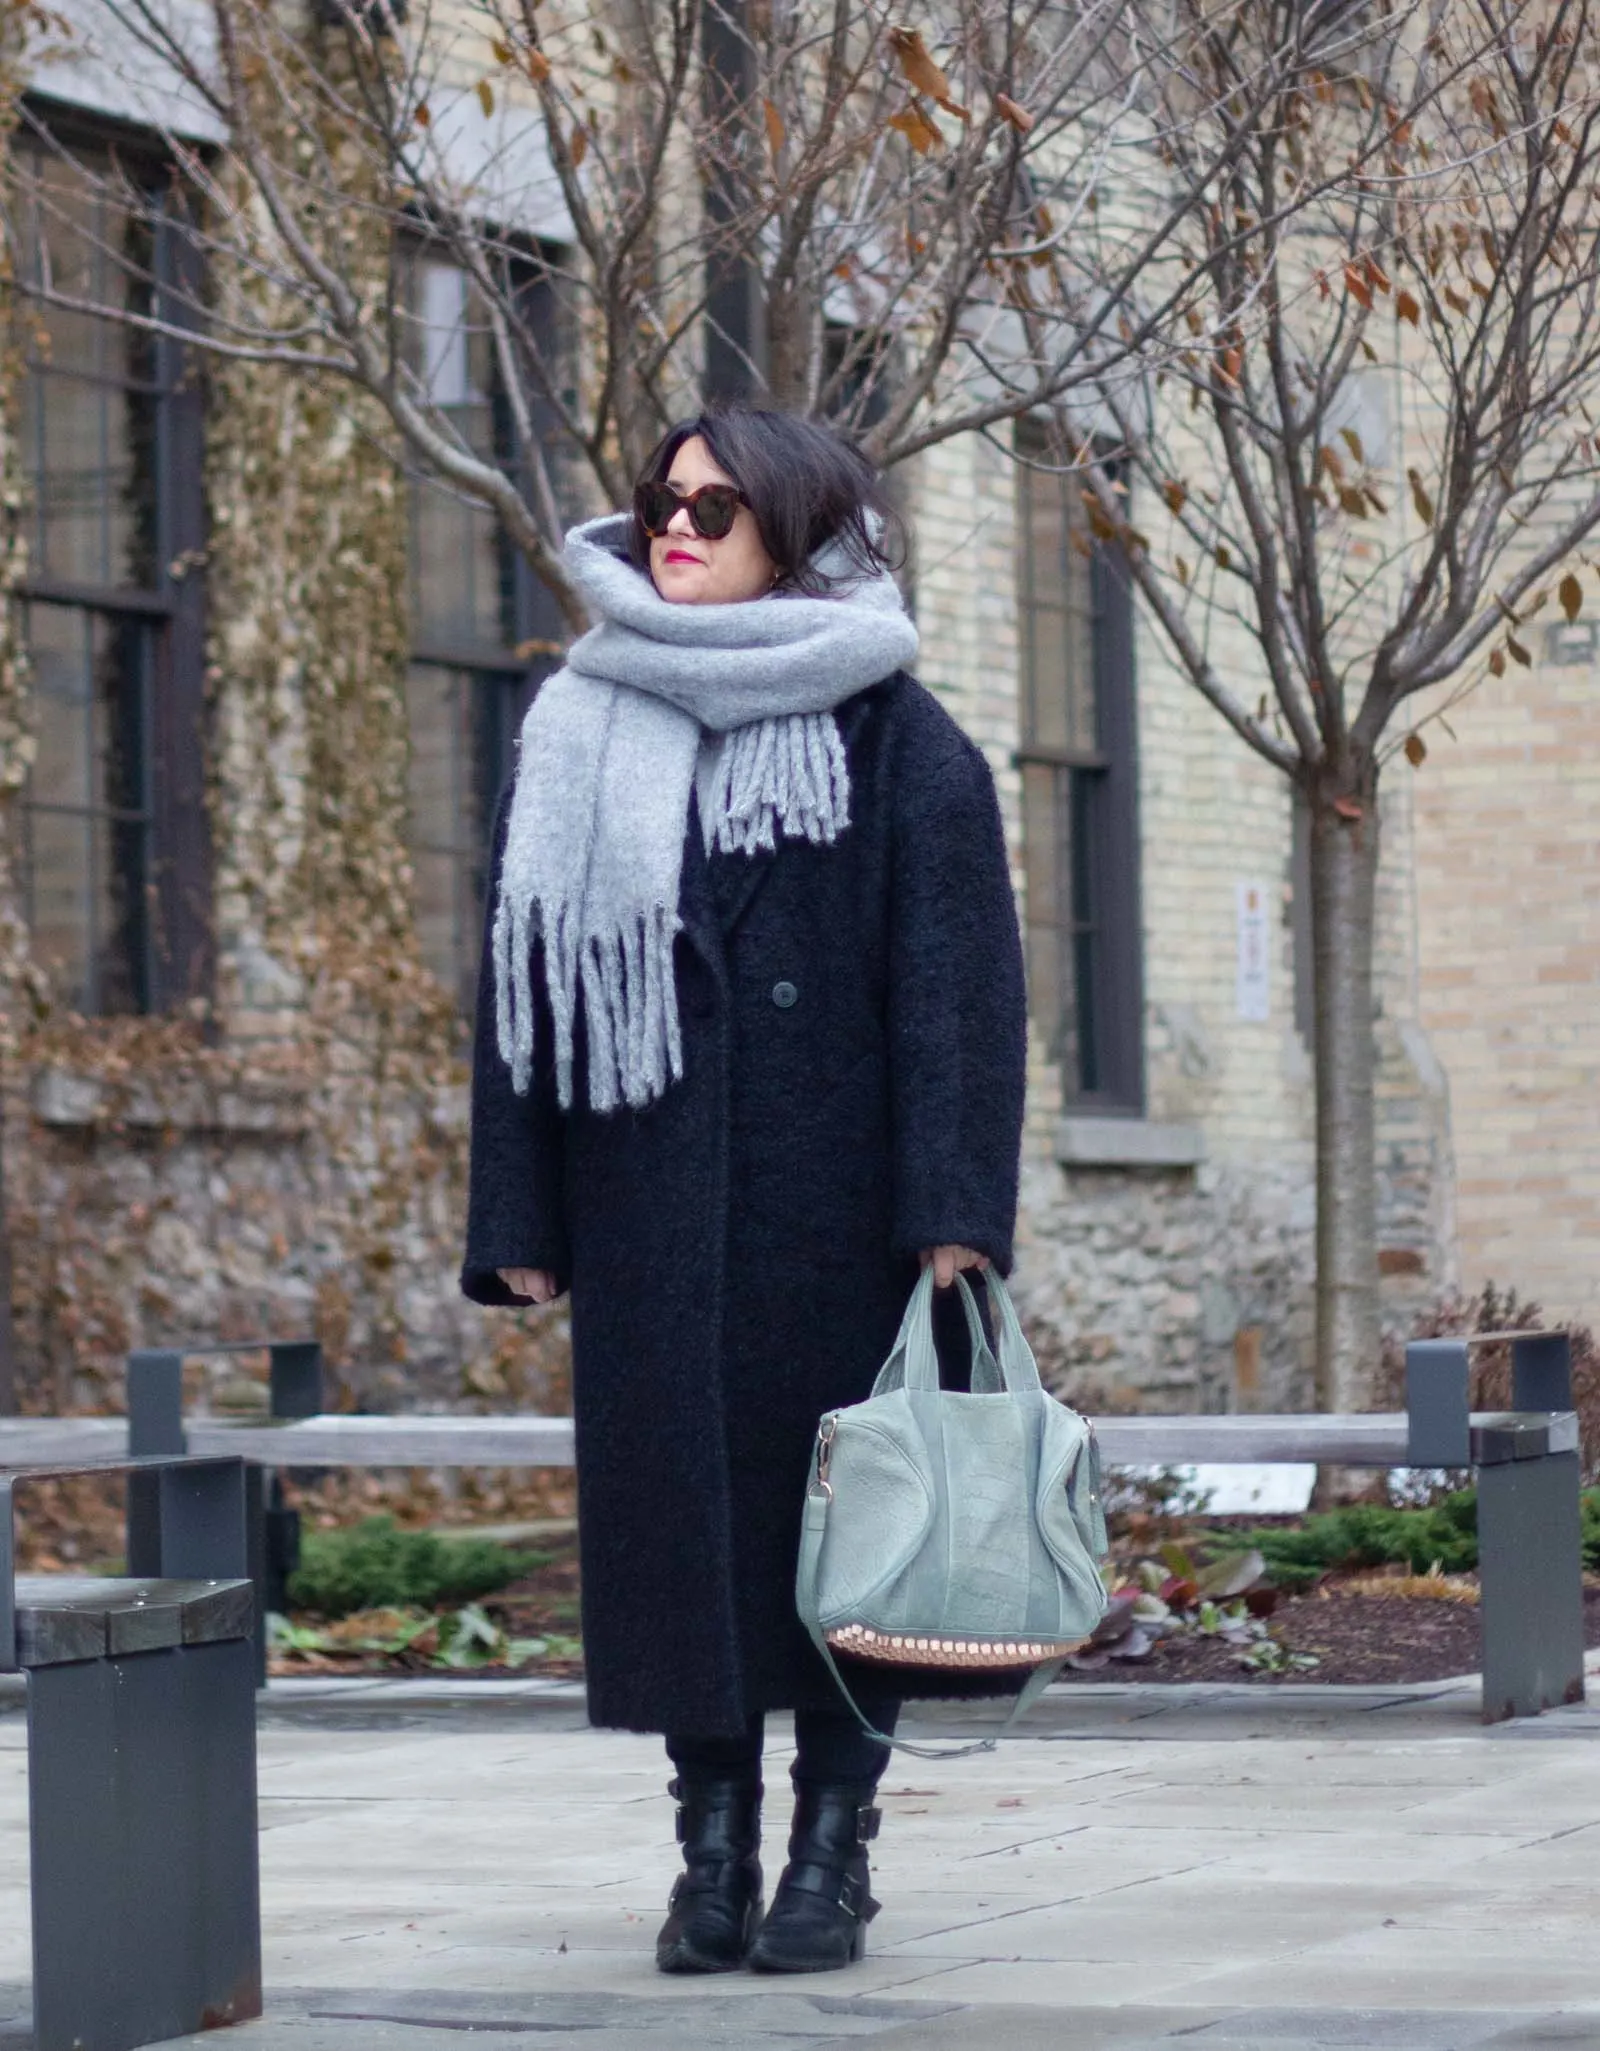 black and grey outfit, black coat with grey accessories